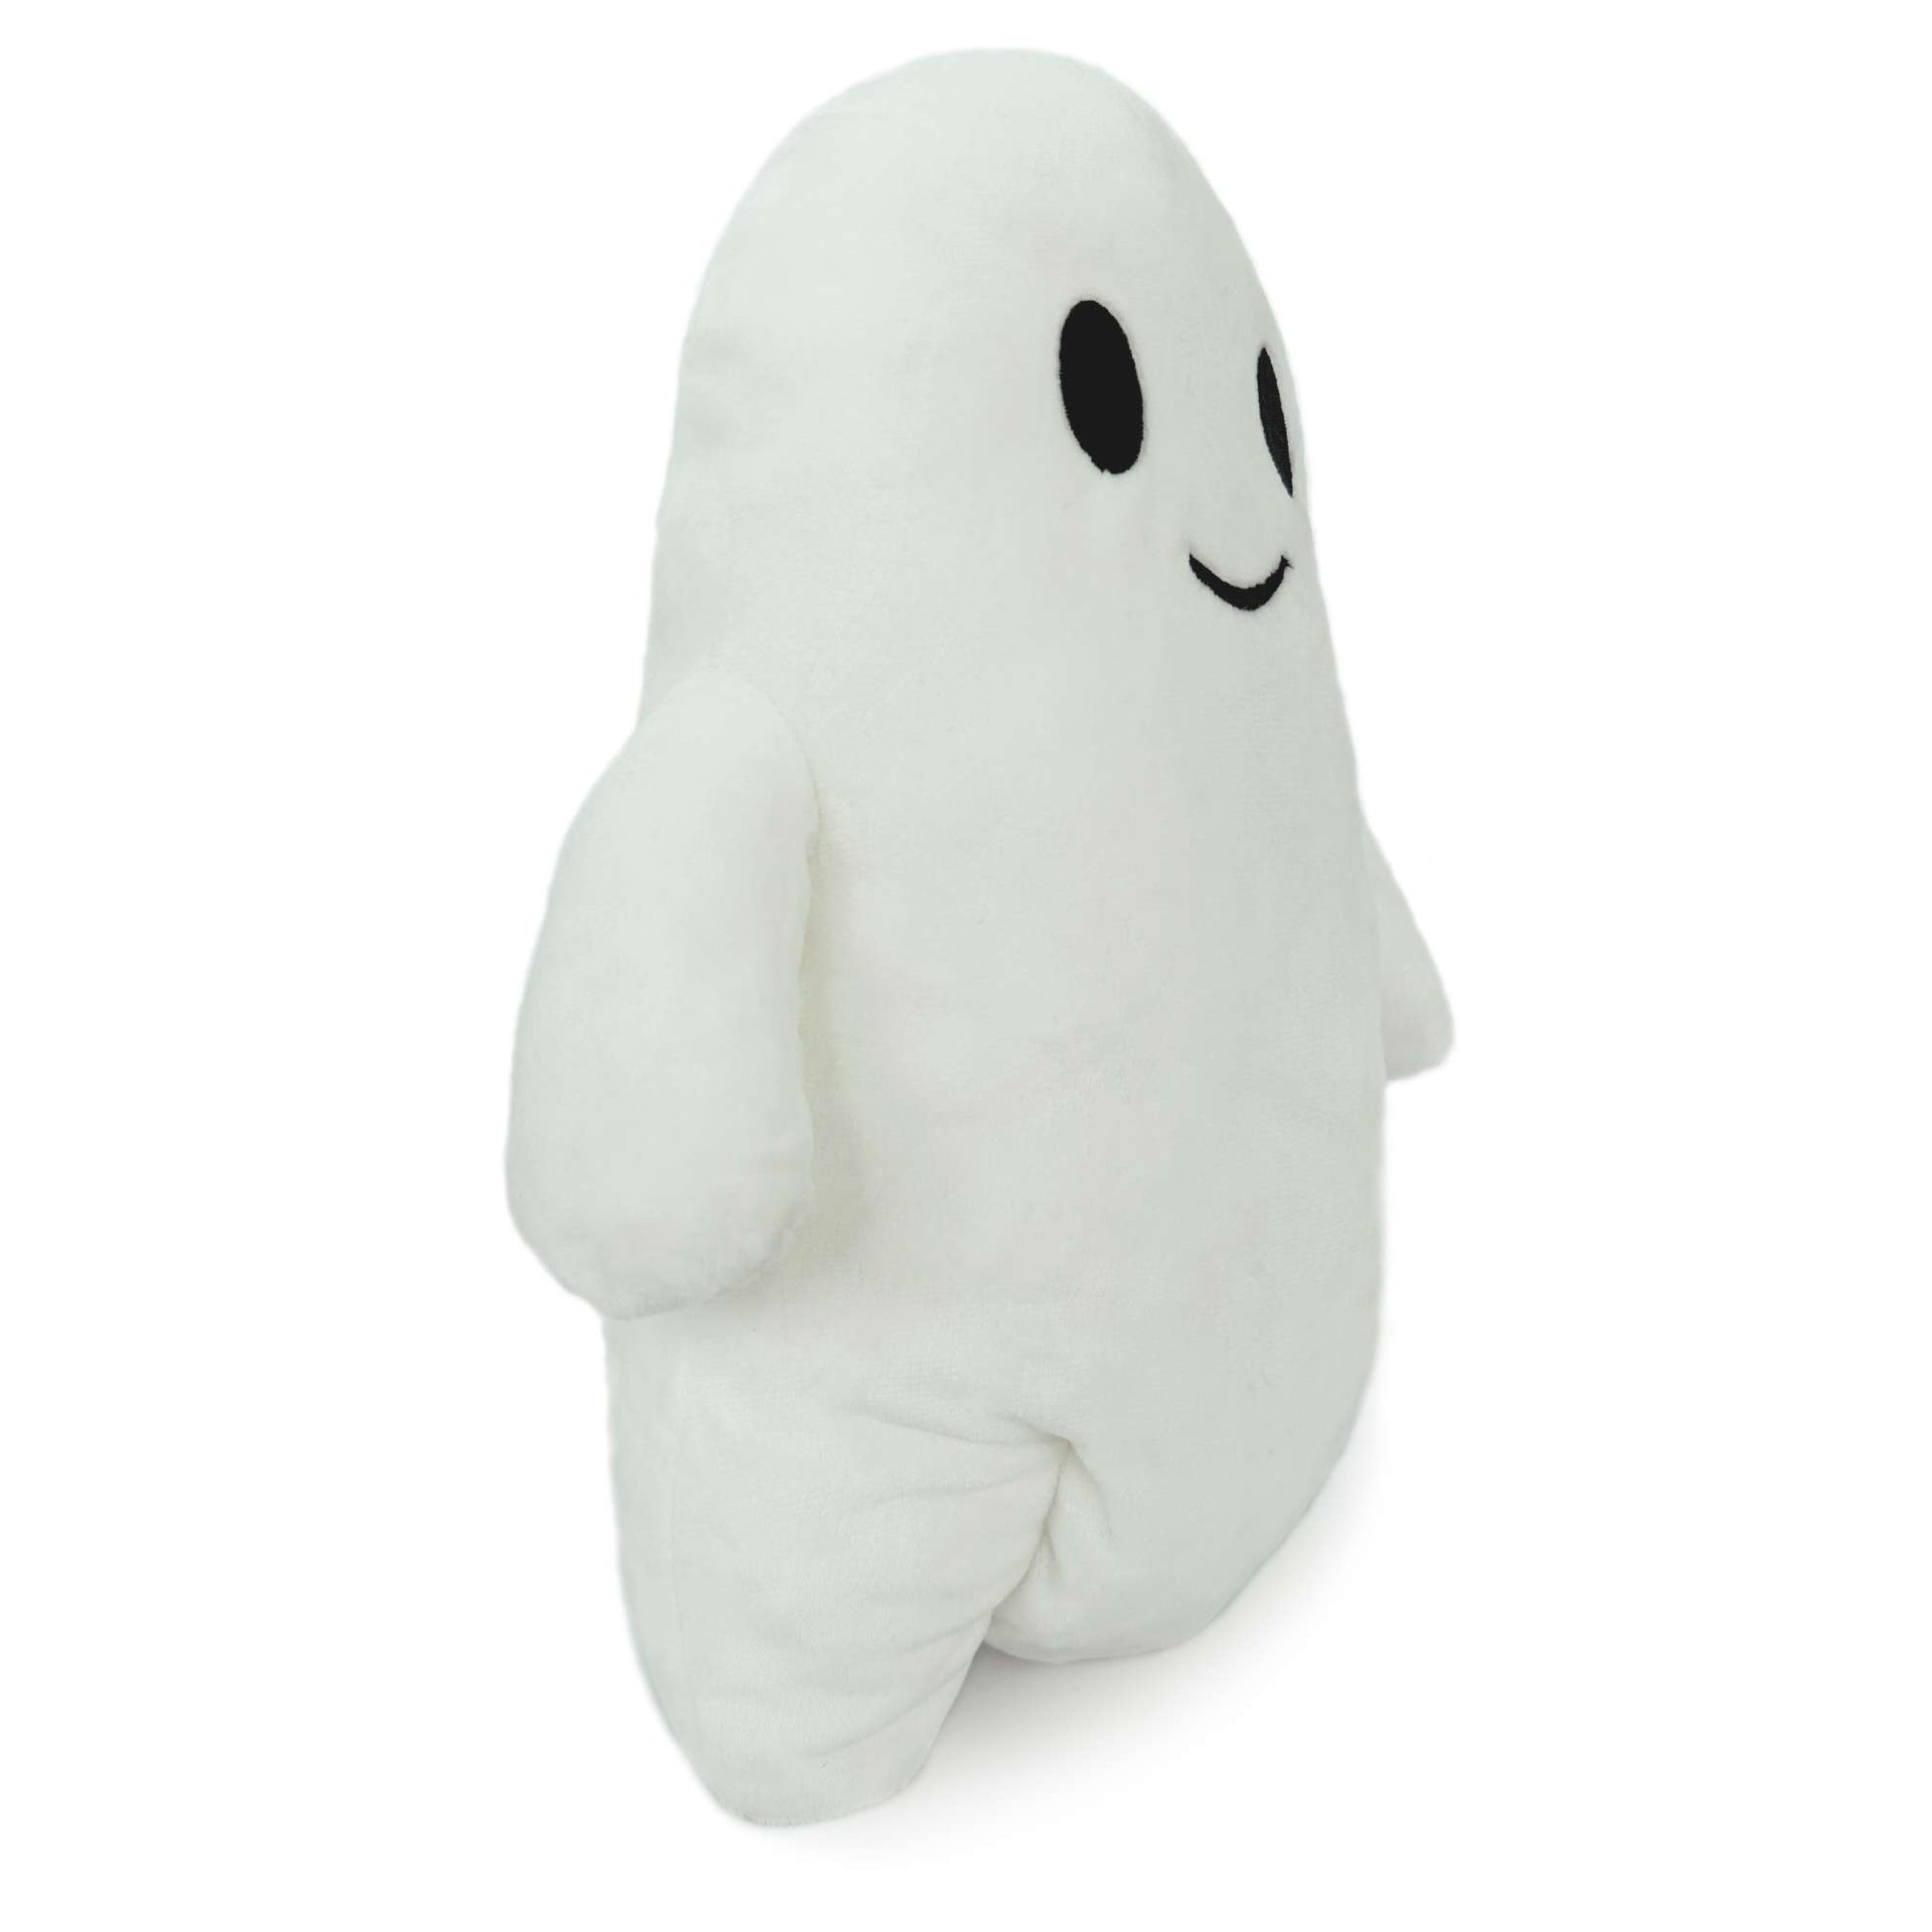 glowing Ghost plush toy for Halloween side view